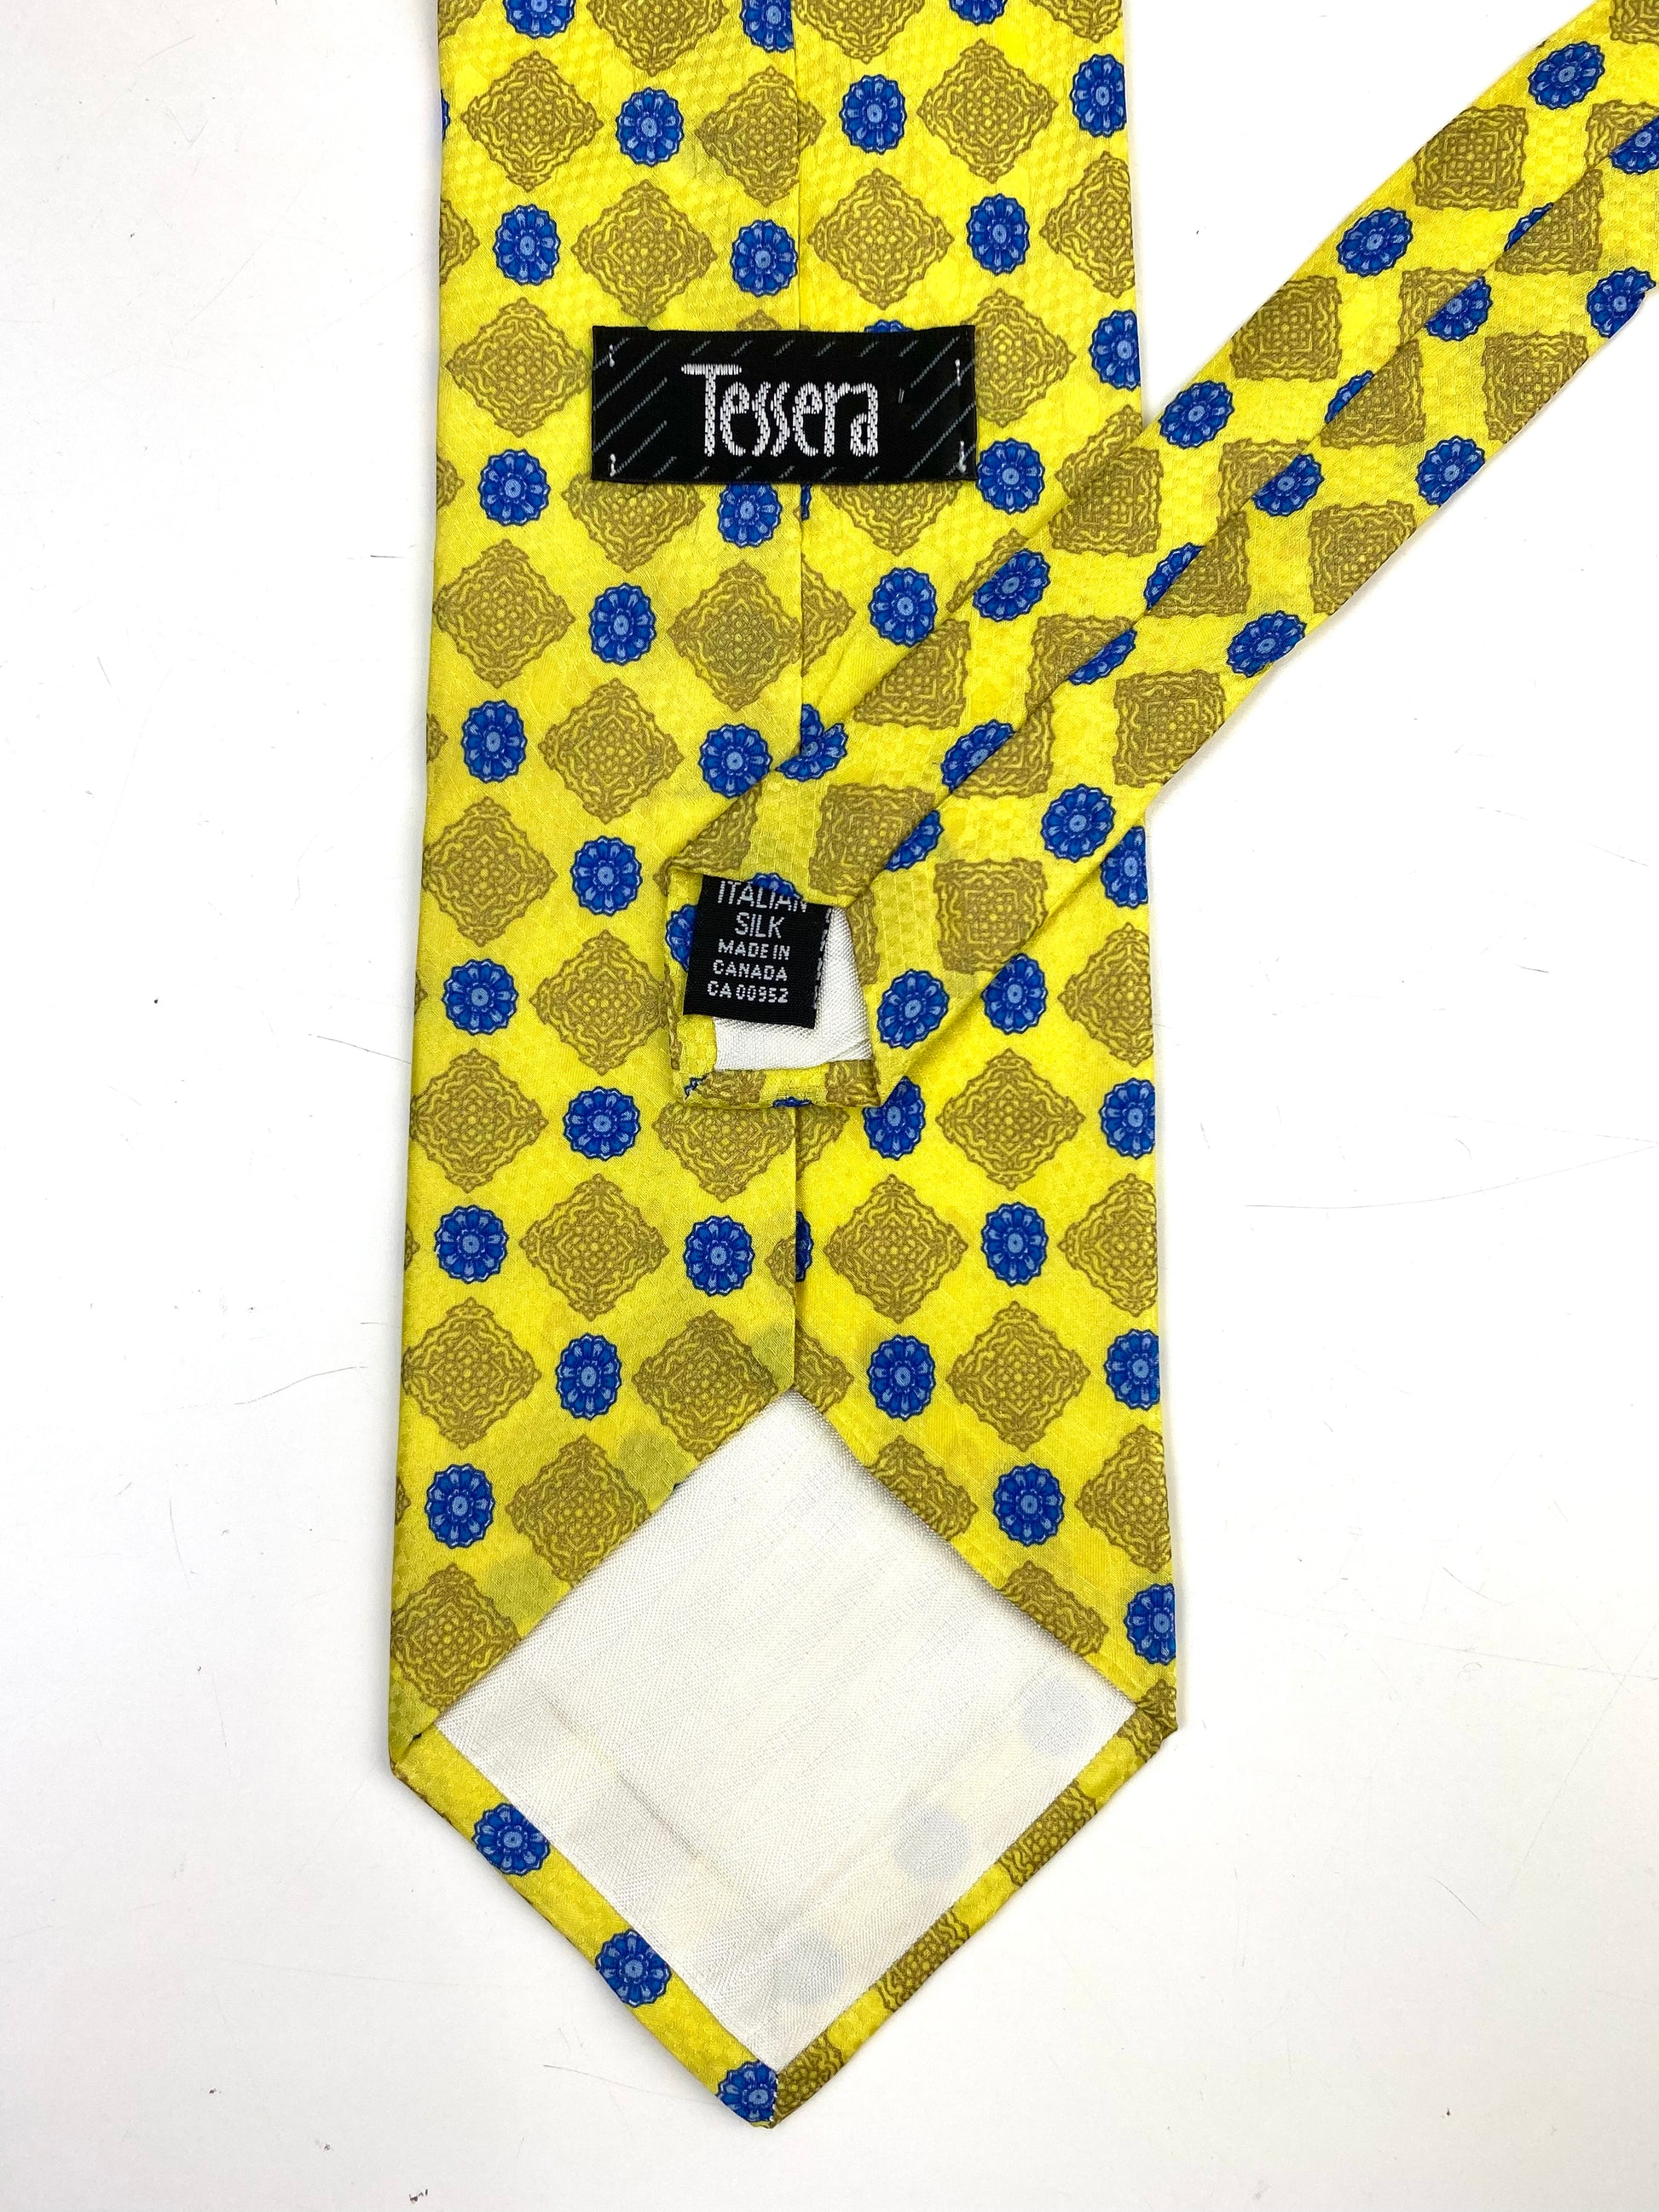 Back and labels of: 90s Deadstock Silk Necktie, Men's Vintage Yellow/Gold/Blue Medallion Pattern Tie, NOS